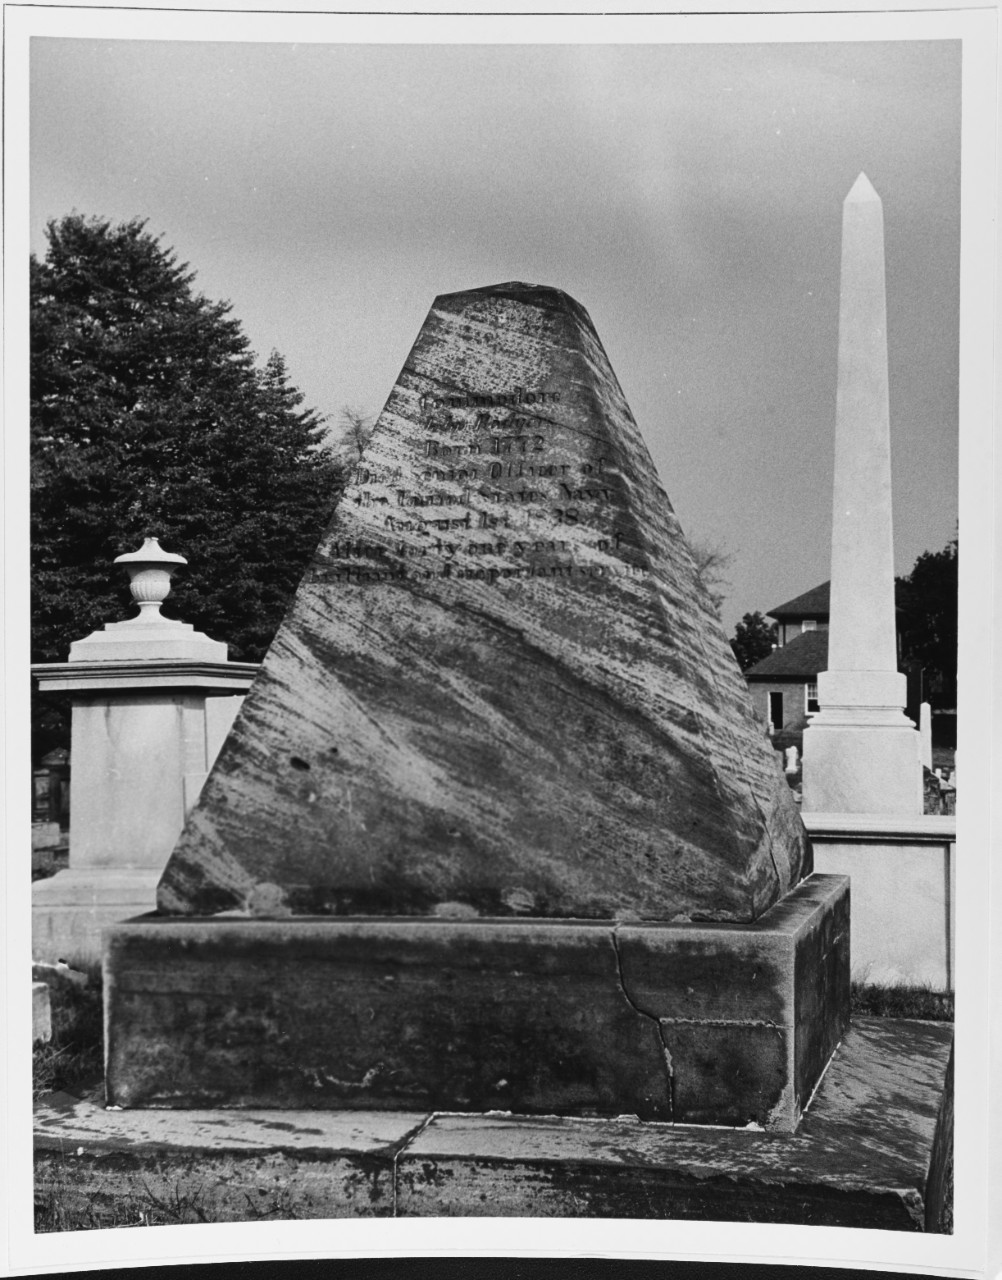 Tombstone of Commodore John Rodgers (1772 - August 1, 1838) Congressional Cemetery, Washington, D.C.